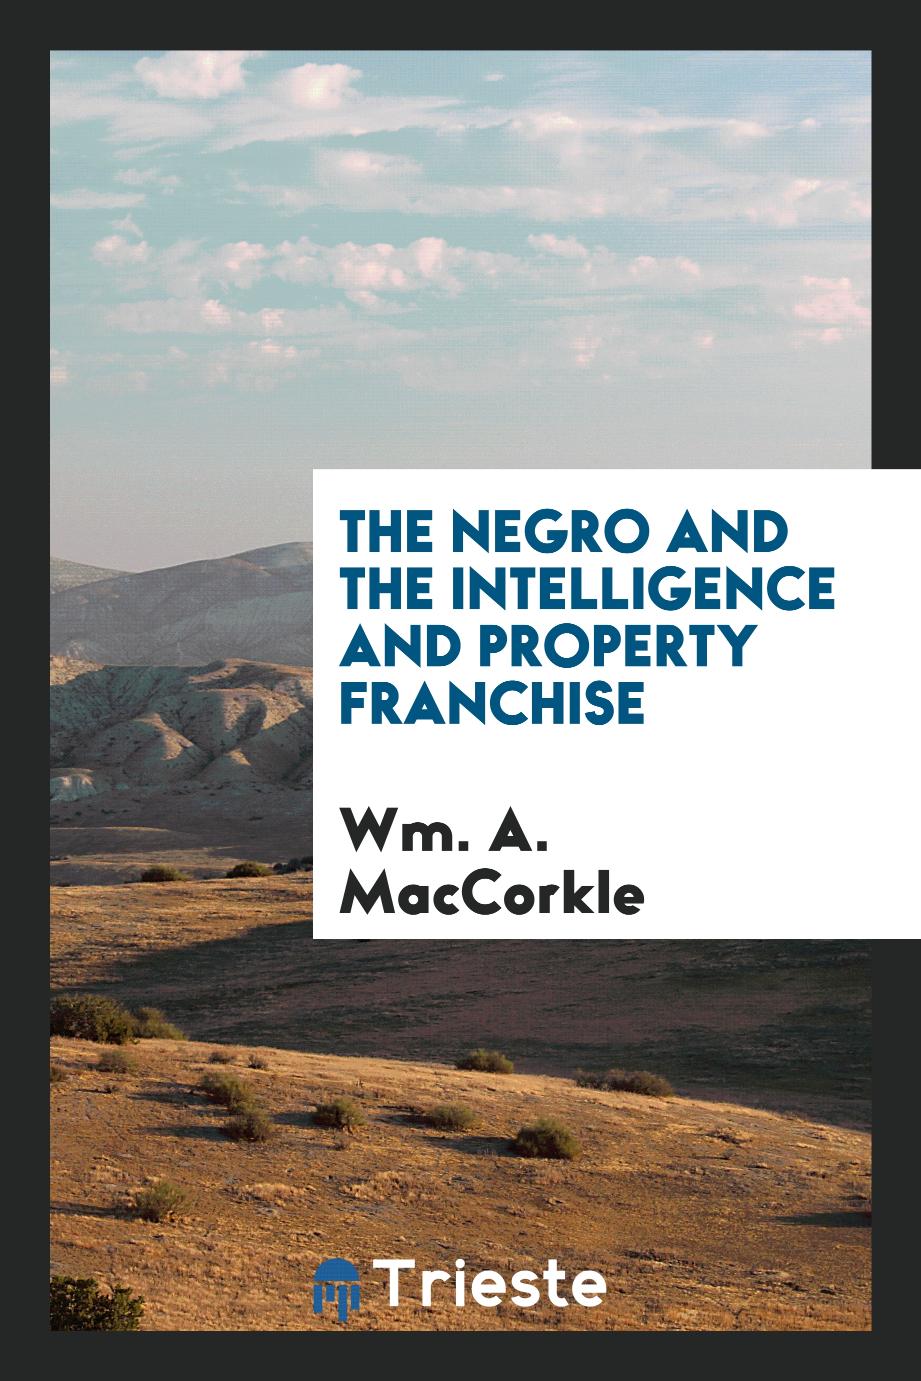 The Negro and the intelligence and property franchise